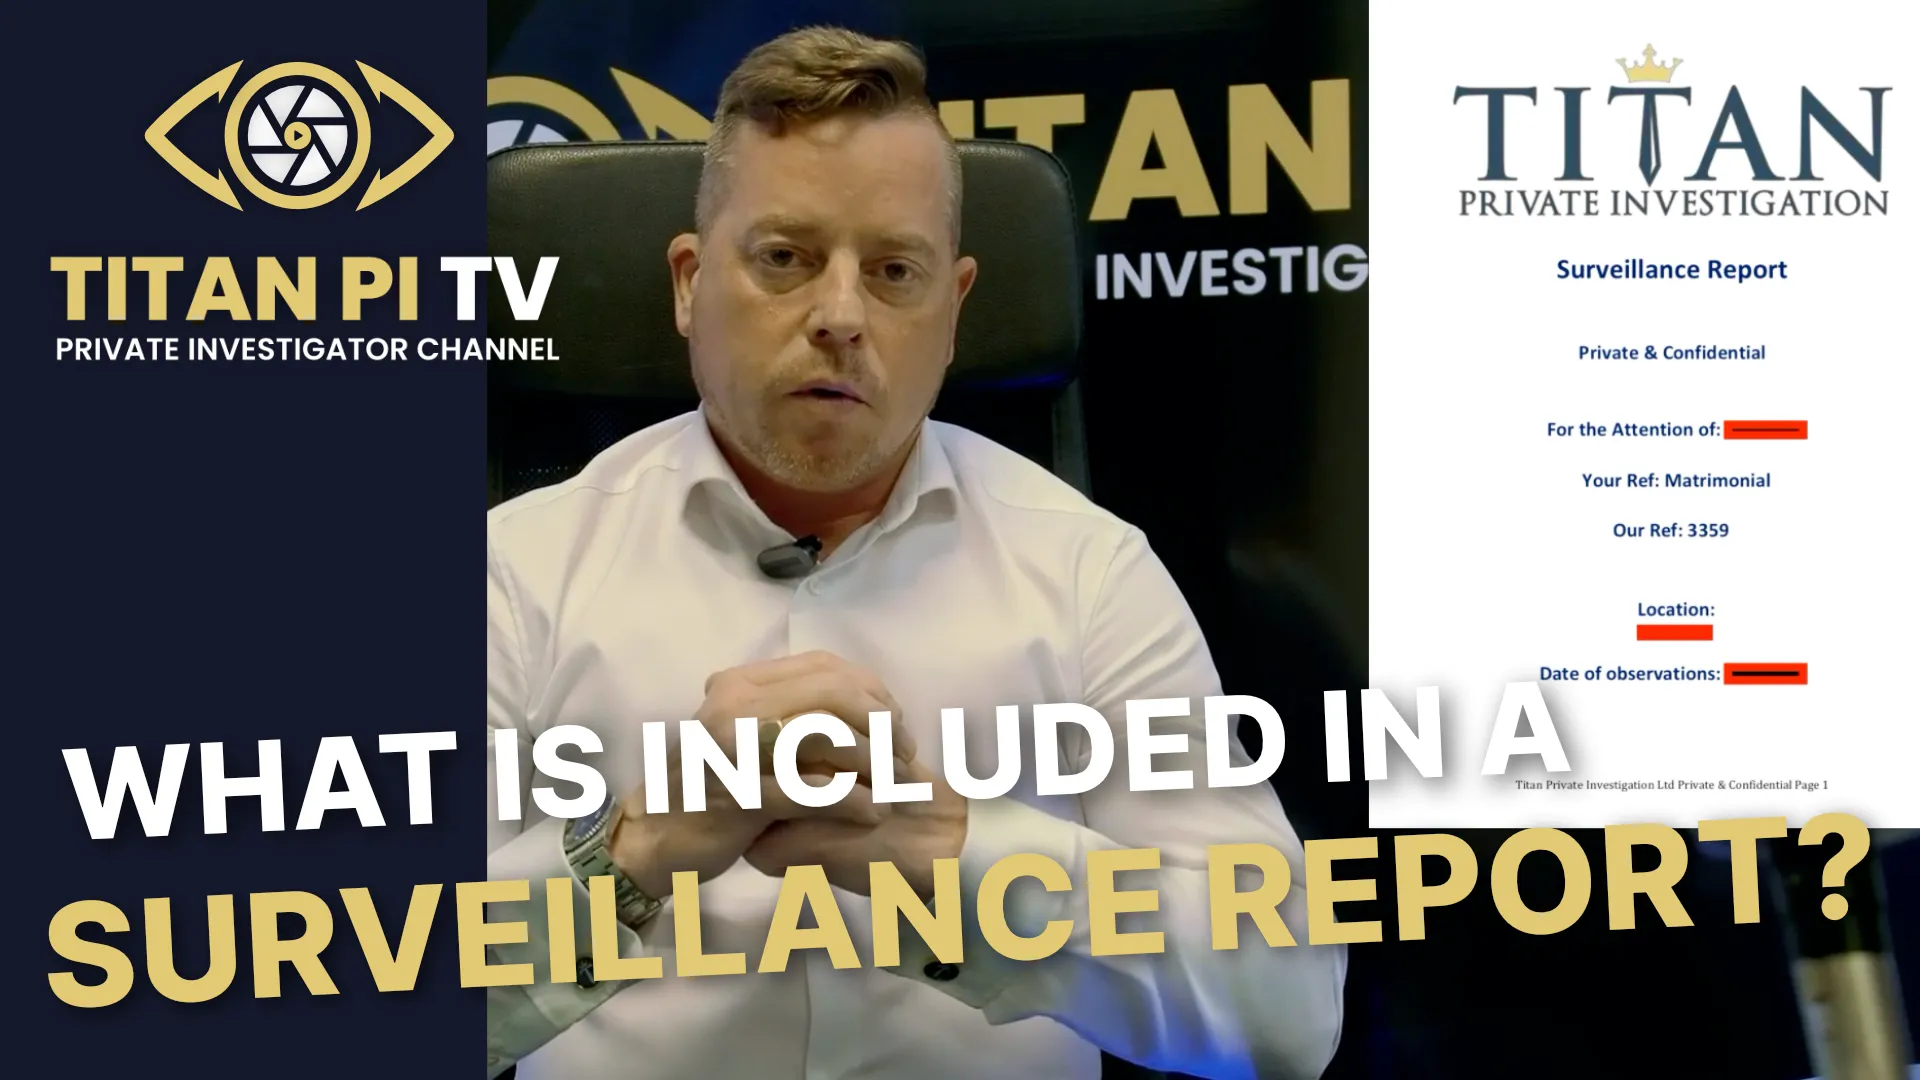 What is included in a surveillance report Episode 59 | Titan PI TV